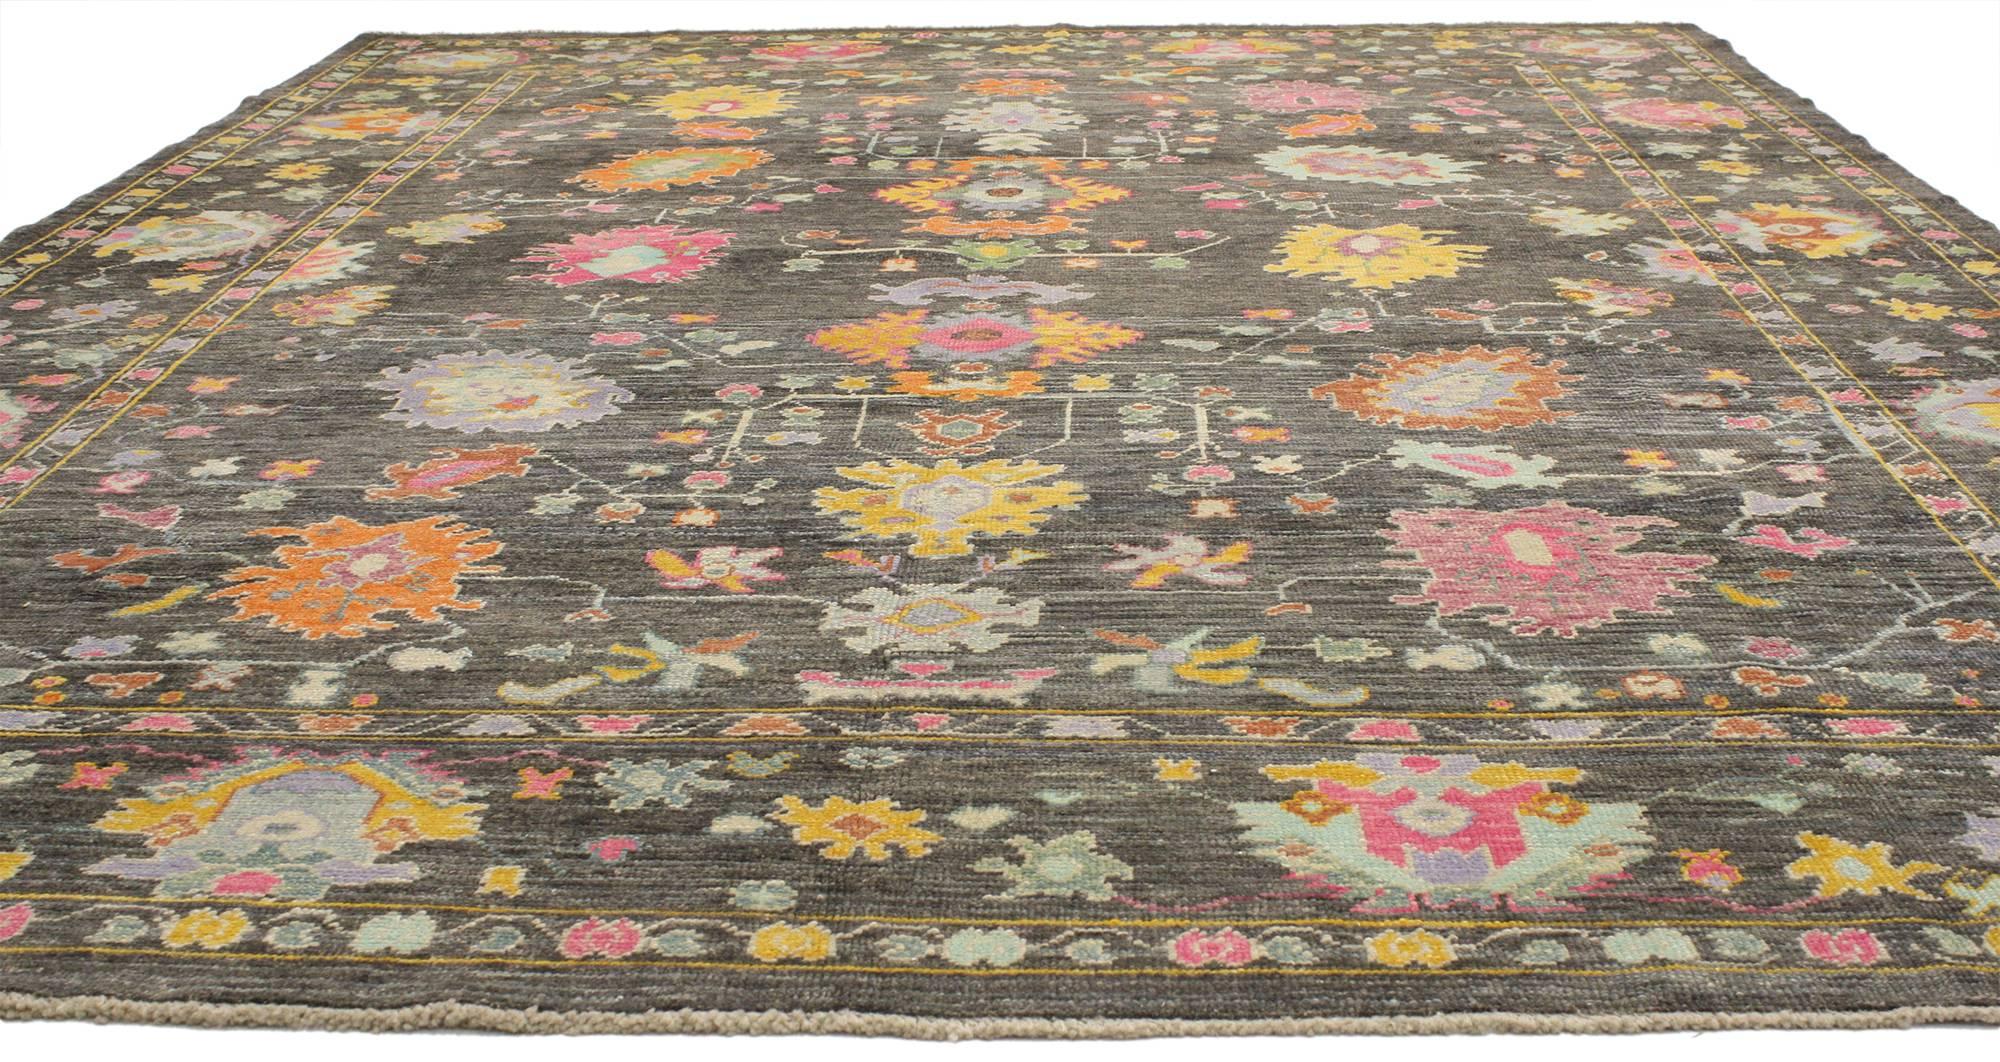 52218, Colorful Contemporary Turkish Oushak Rug with Modern Style. This gorgeous contemporary Turkish Oushak rug with modern style rug features variegated shades of magenta, hot pink, persimmon, tangerine, pistachio, cerulean, yellow, light